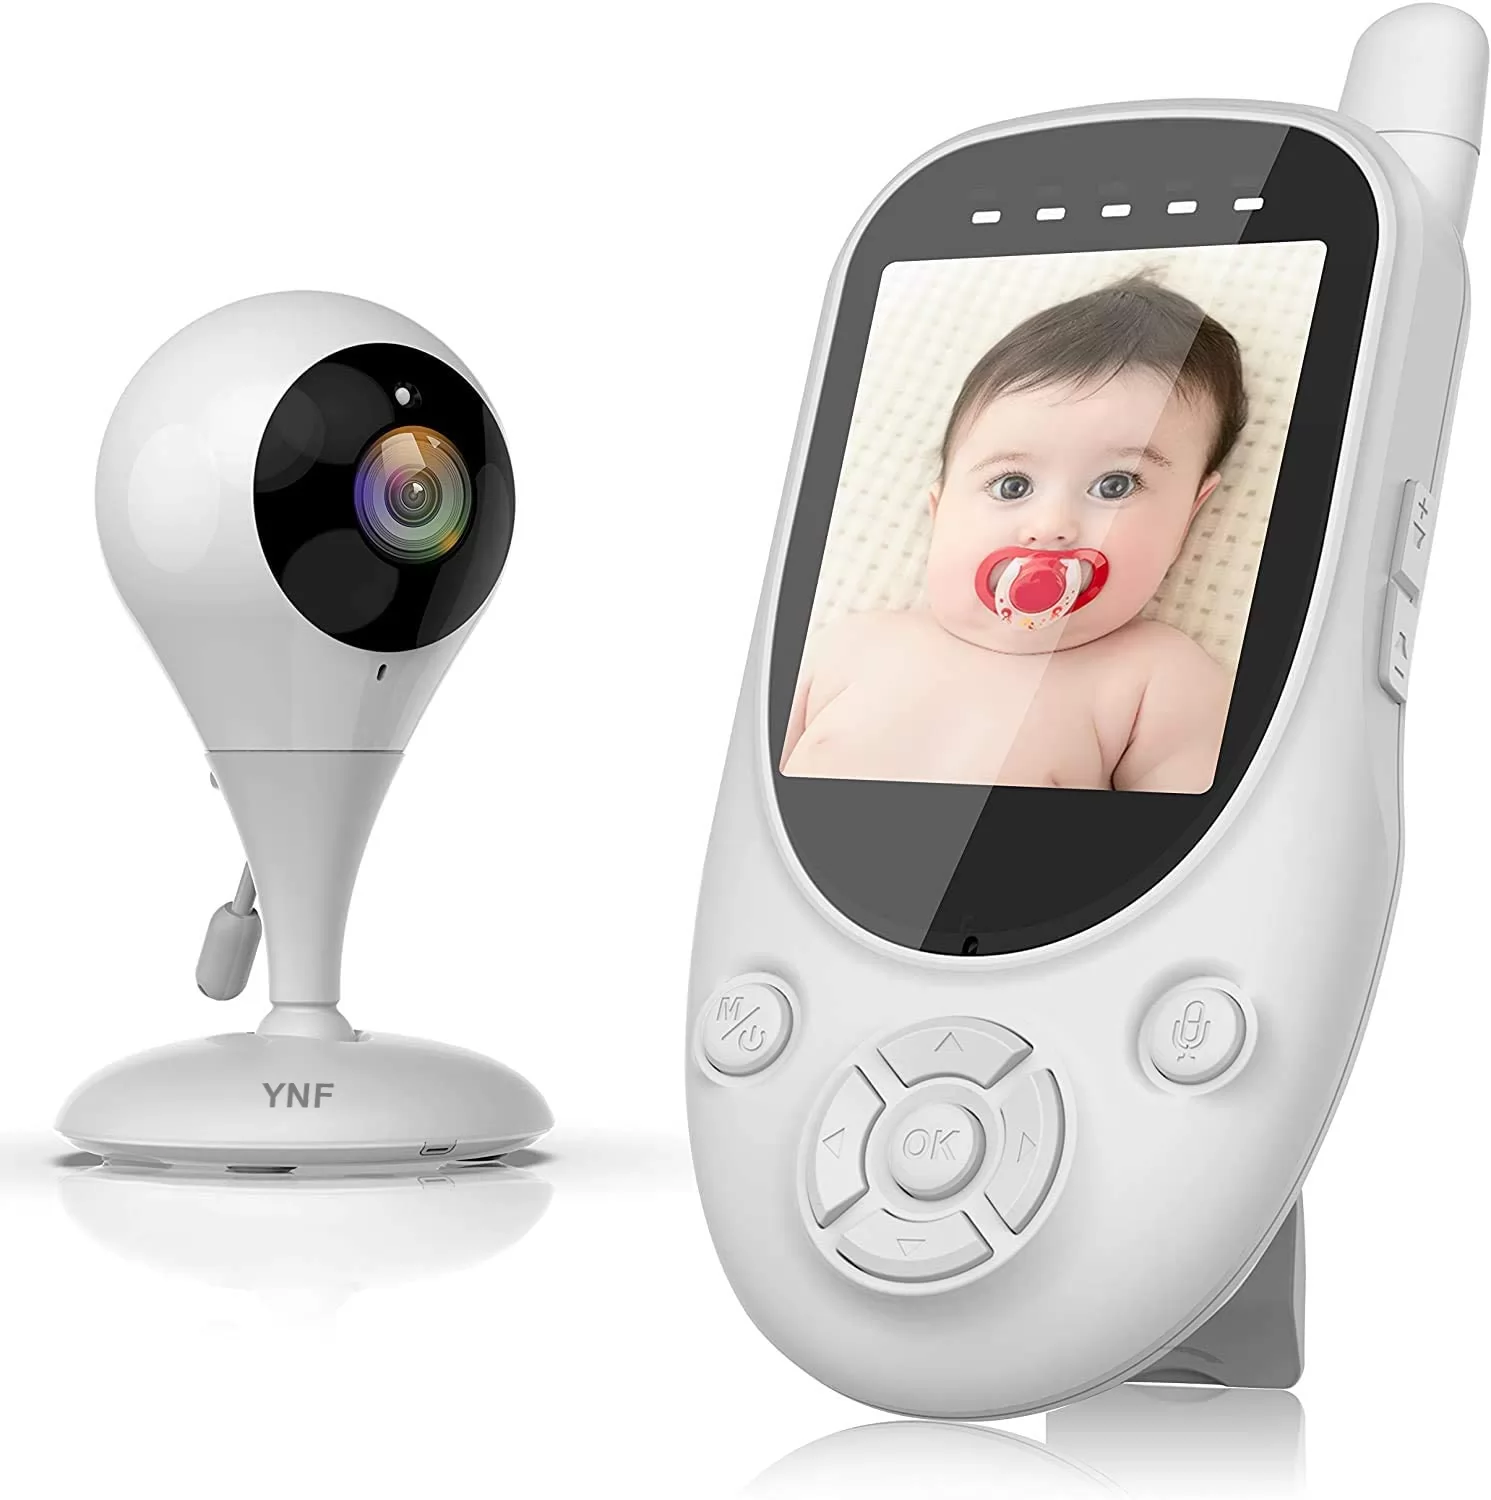 YNF Baby Monitor, Video Baby Monitor with Camera and Audio, 2.4GHz Wireless Two Way Video Talk in 1000ft Long Range, Auto Infrared Night Vision